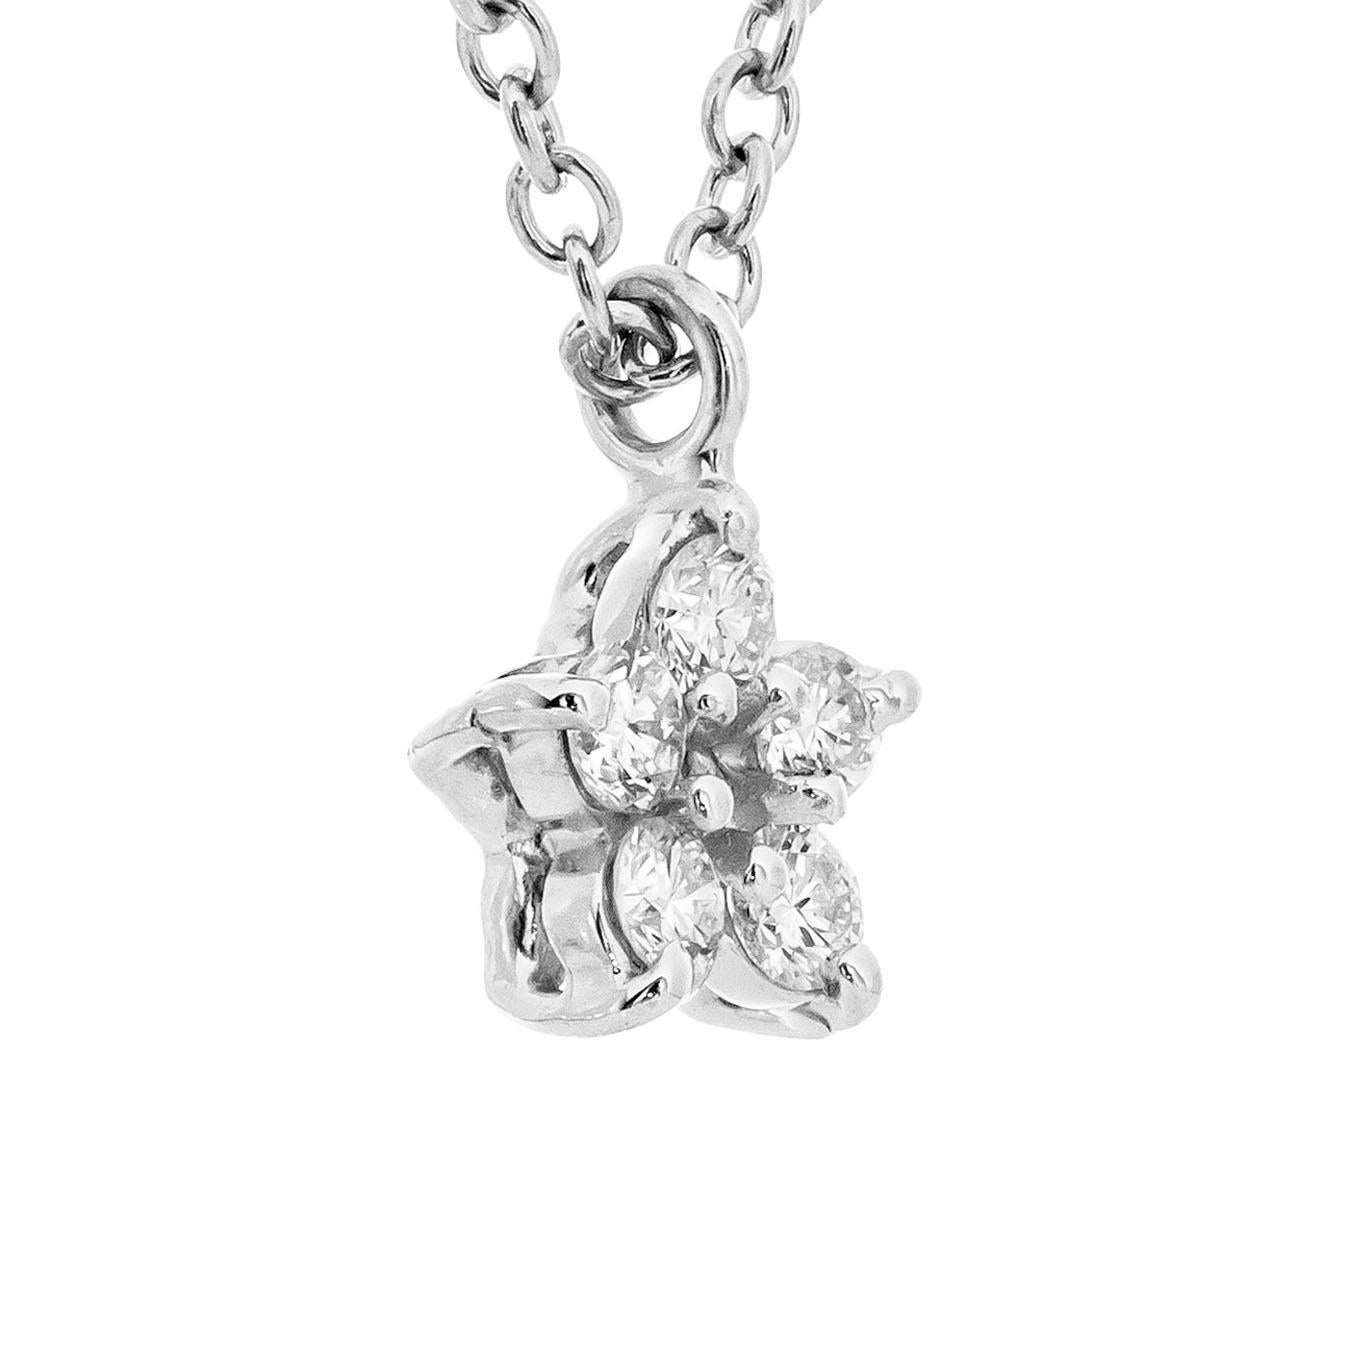 Petite star design pendant with 5 brilliant cut diamonds in platinum. 16 inch chain. Created in the Peter Suchy workshop.

5 round brilliant cut diamonds, F-G VS approx. .10cts
Platinum
Stamped: PT 950
2.6 grams
Top to bottom: 5.4mm or .20